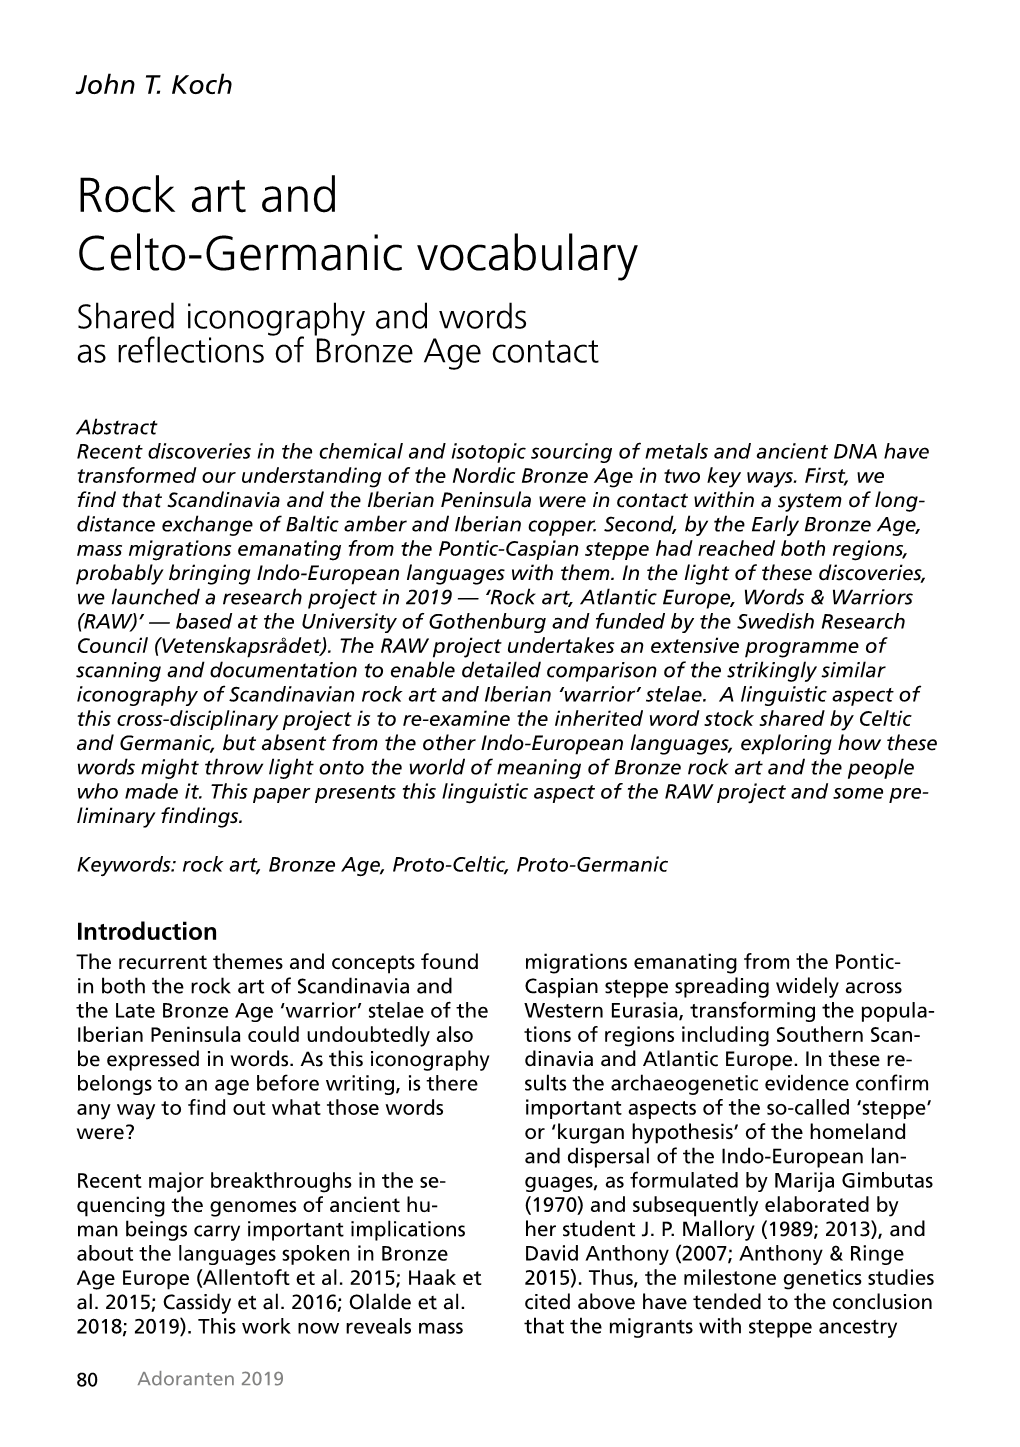 Rock Art and Celto-Germanic Vocabulary Shared Iconography and Words As Reflections of Bronze Age Contact